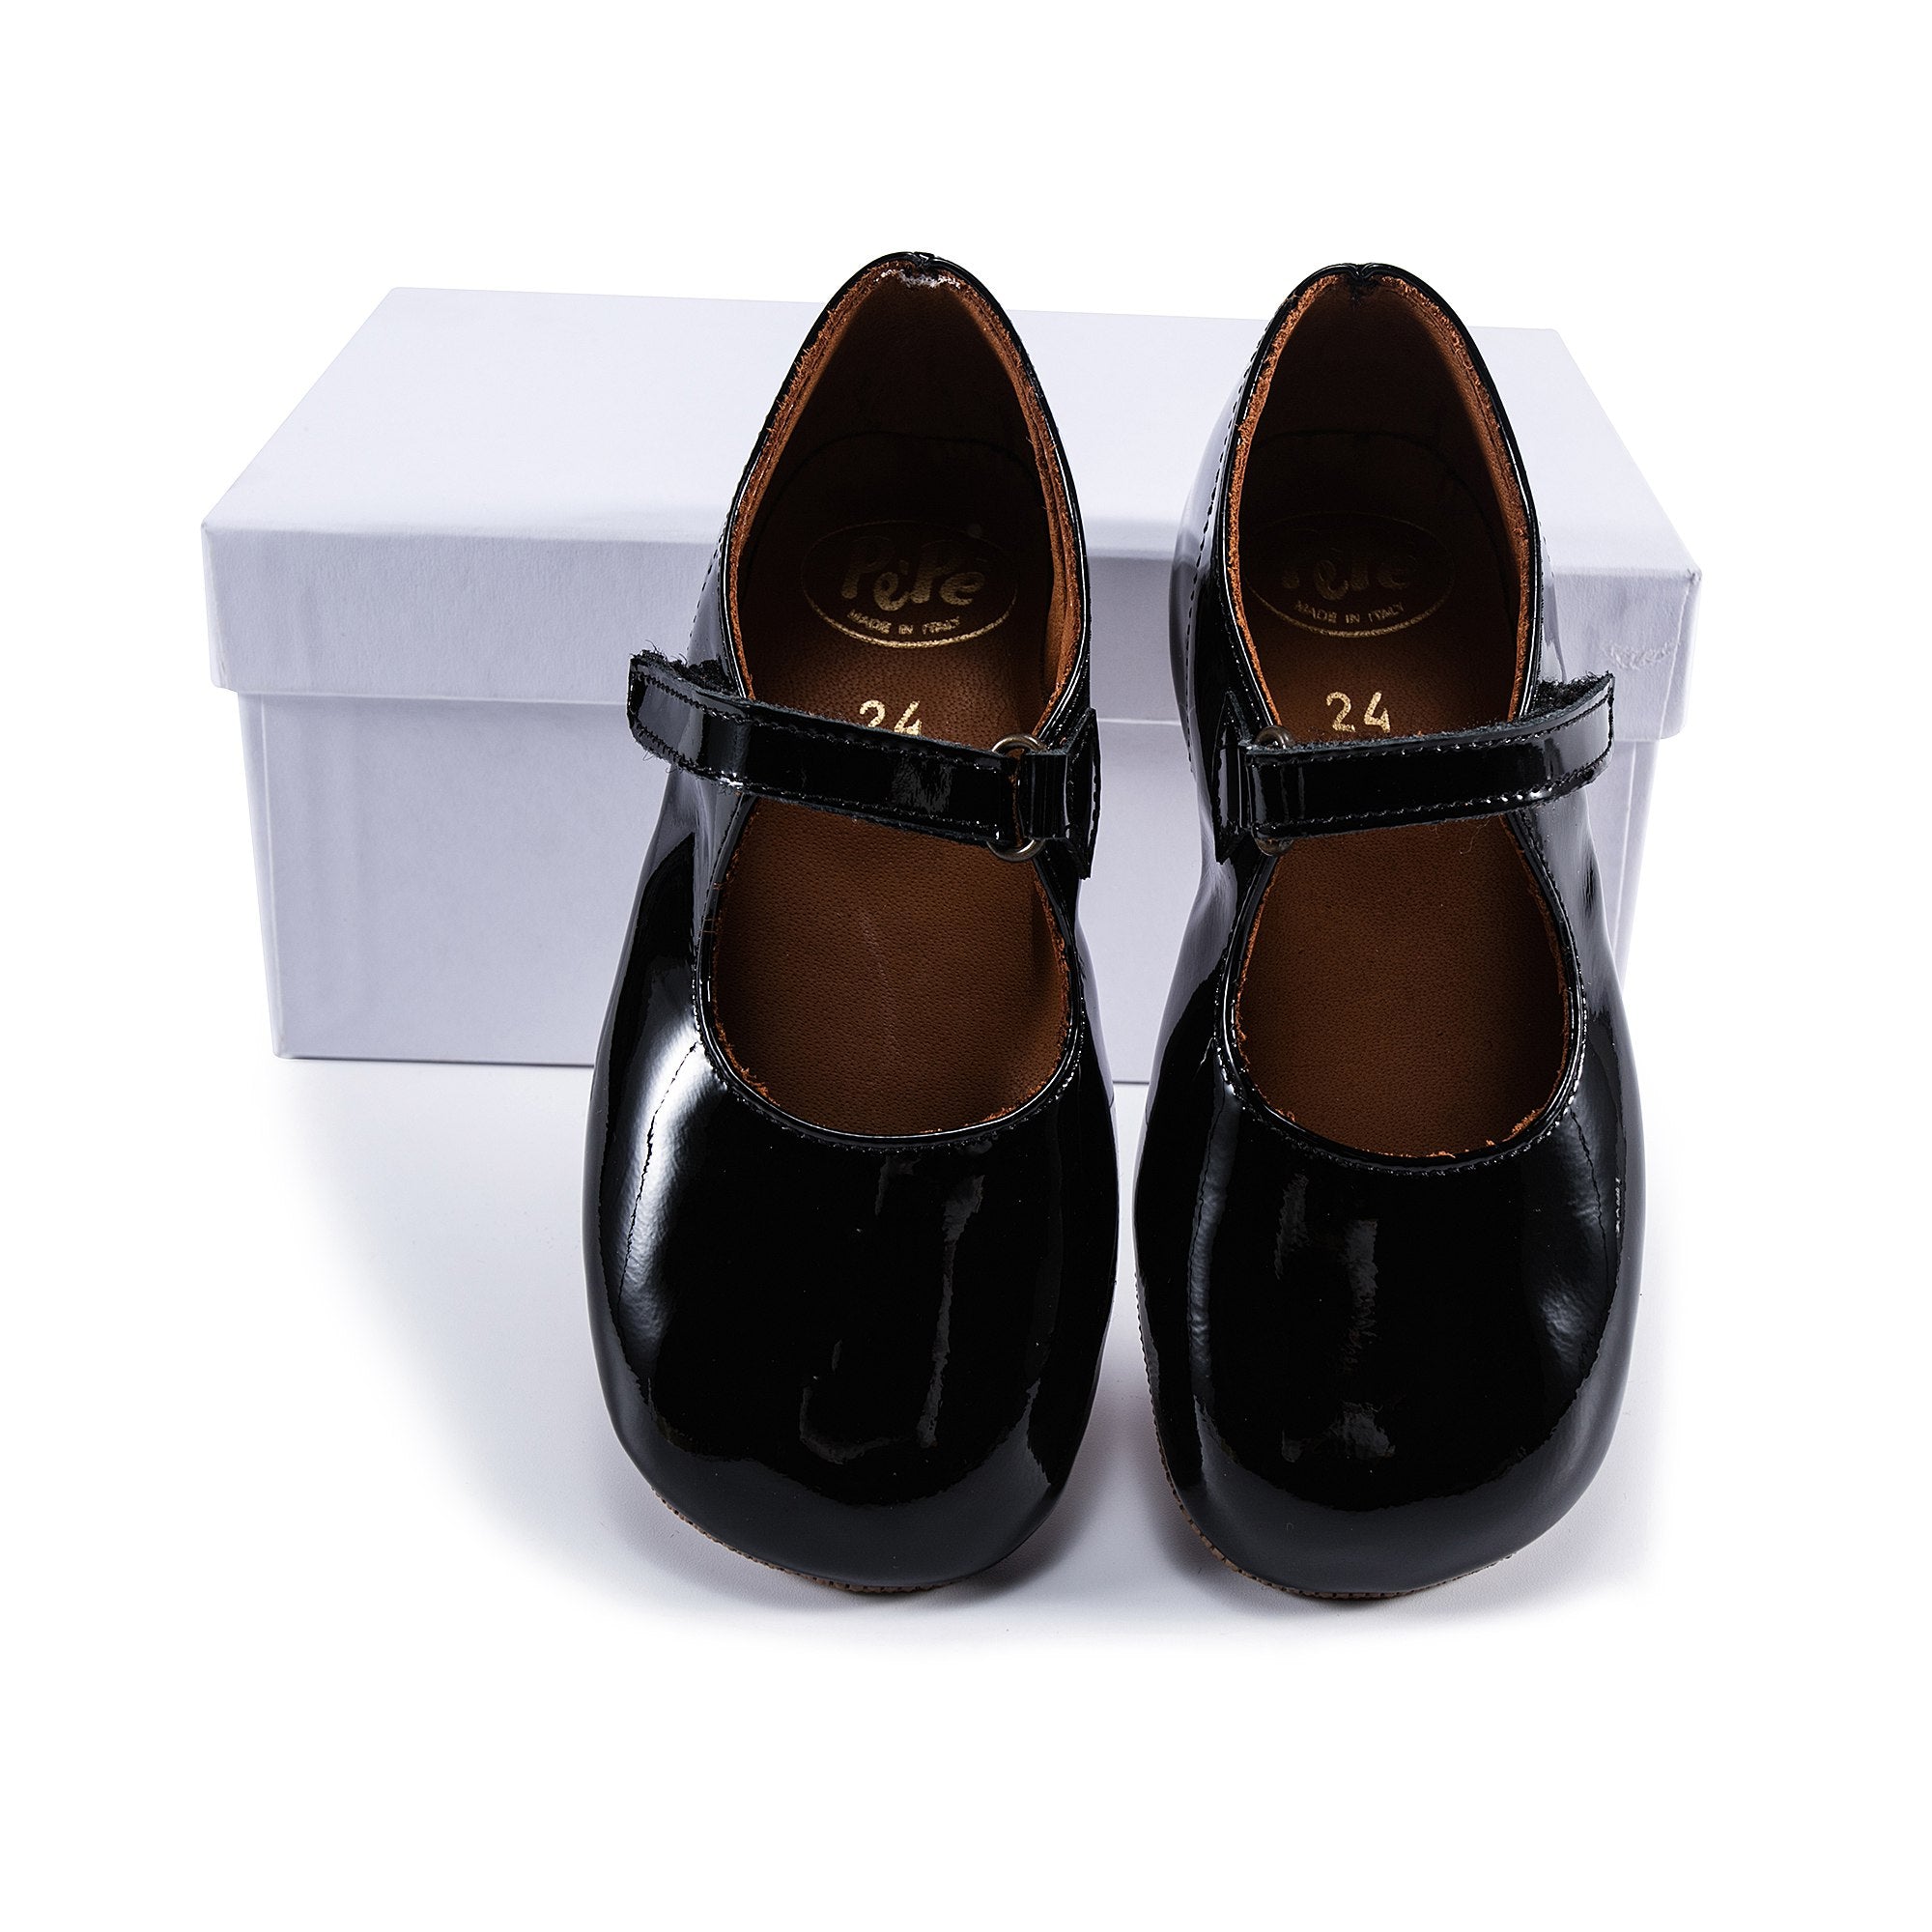 Girls Black Glossy Leather Shoes